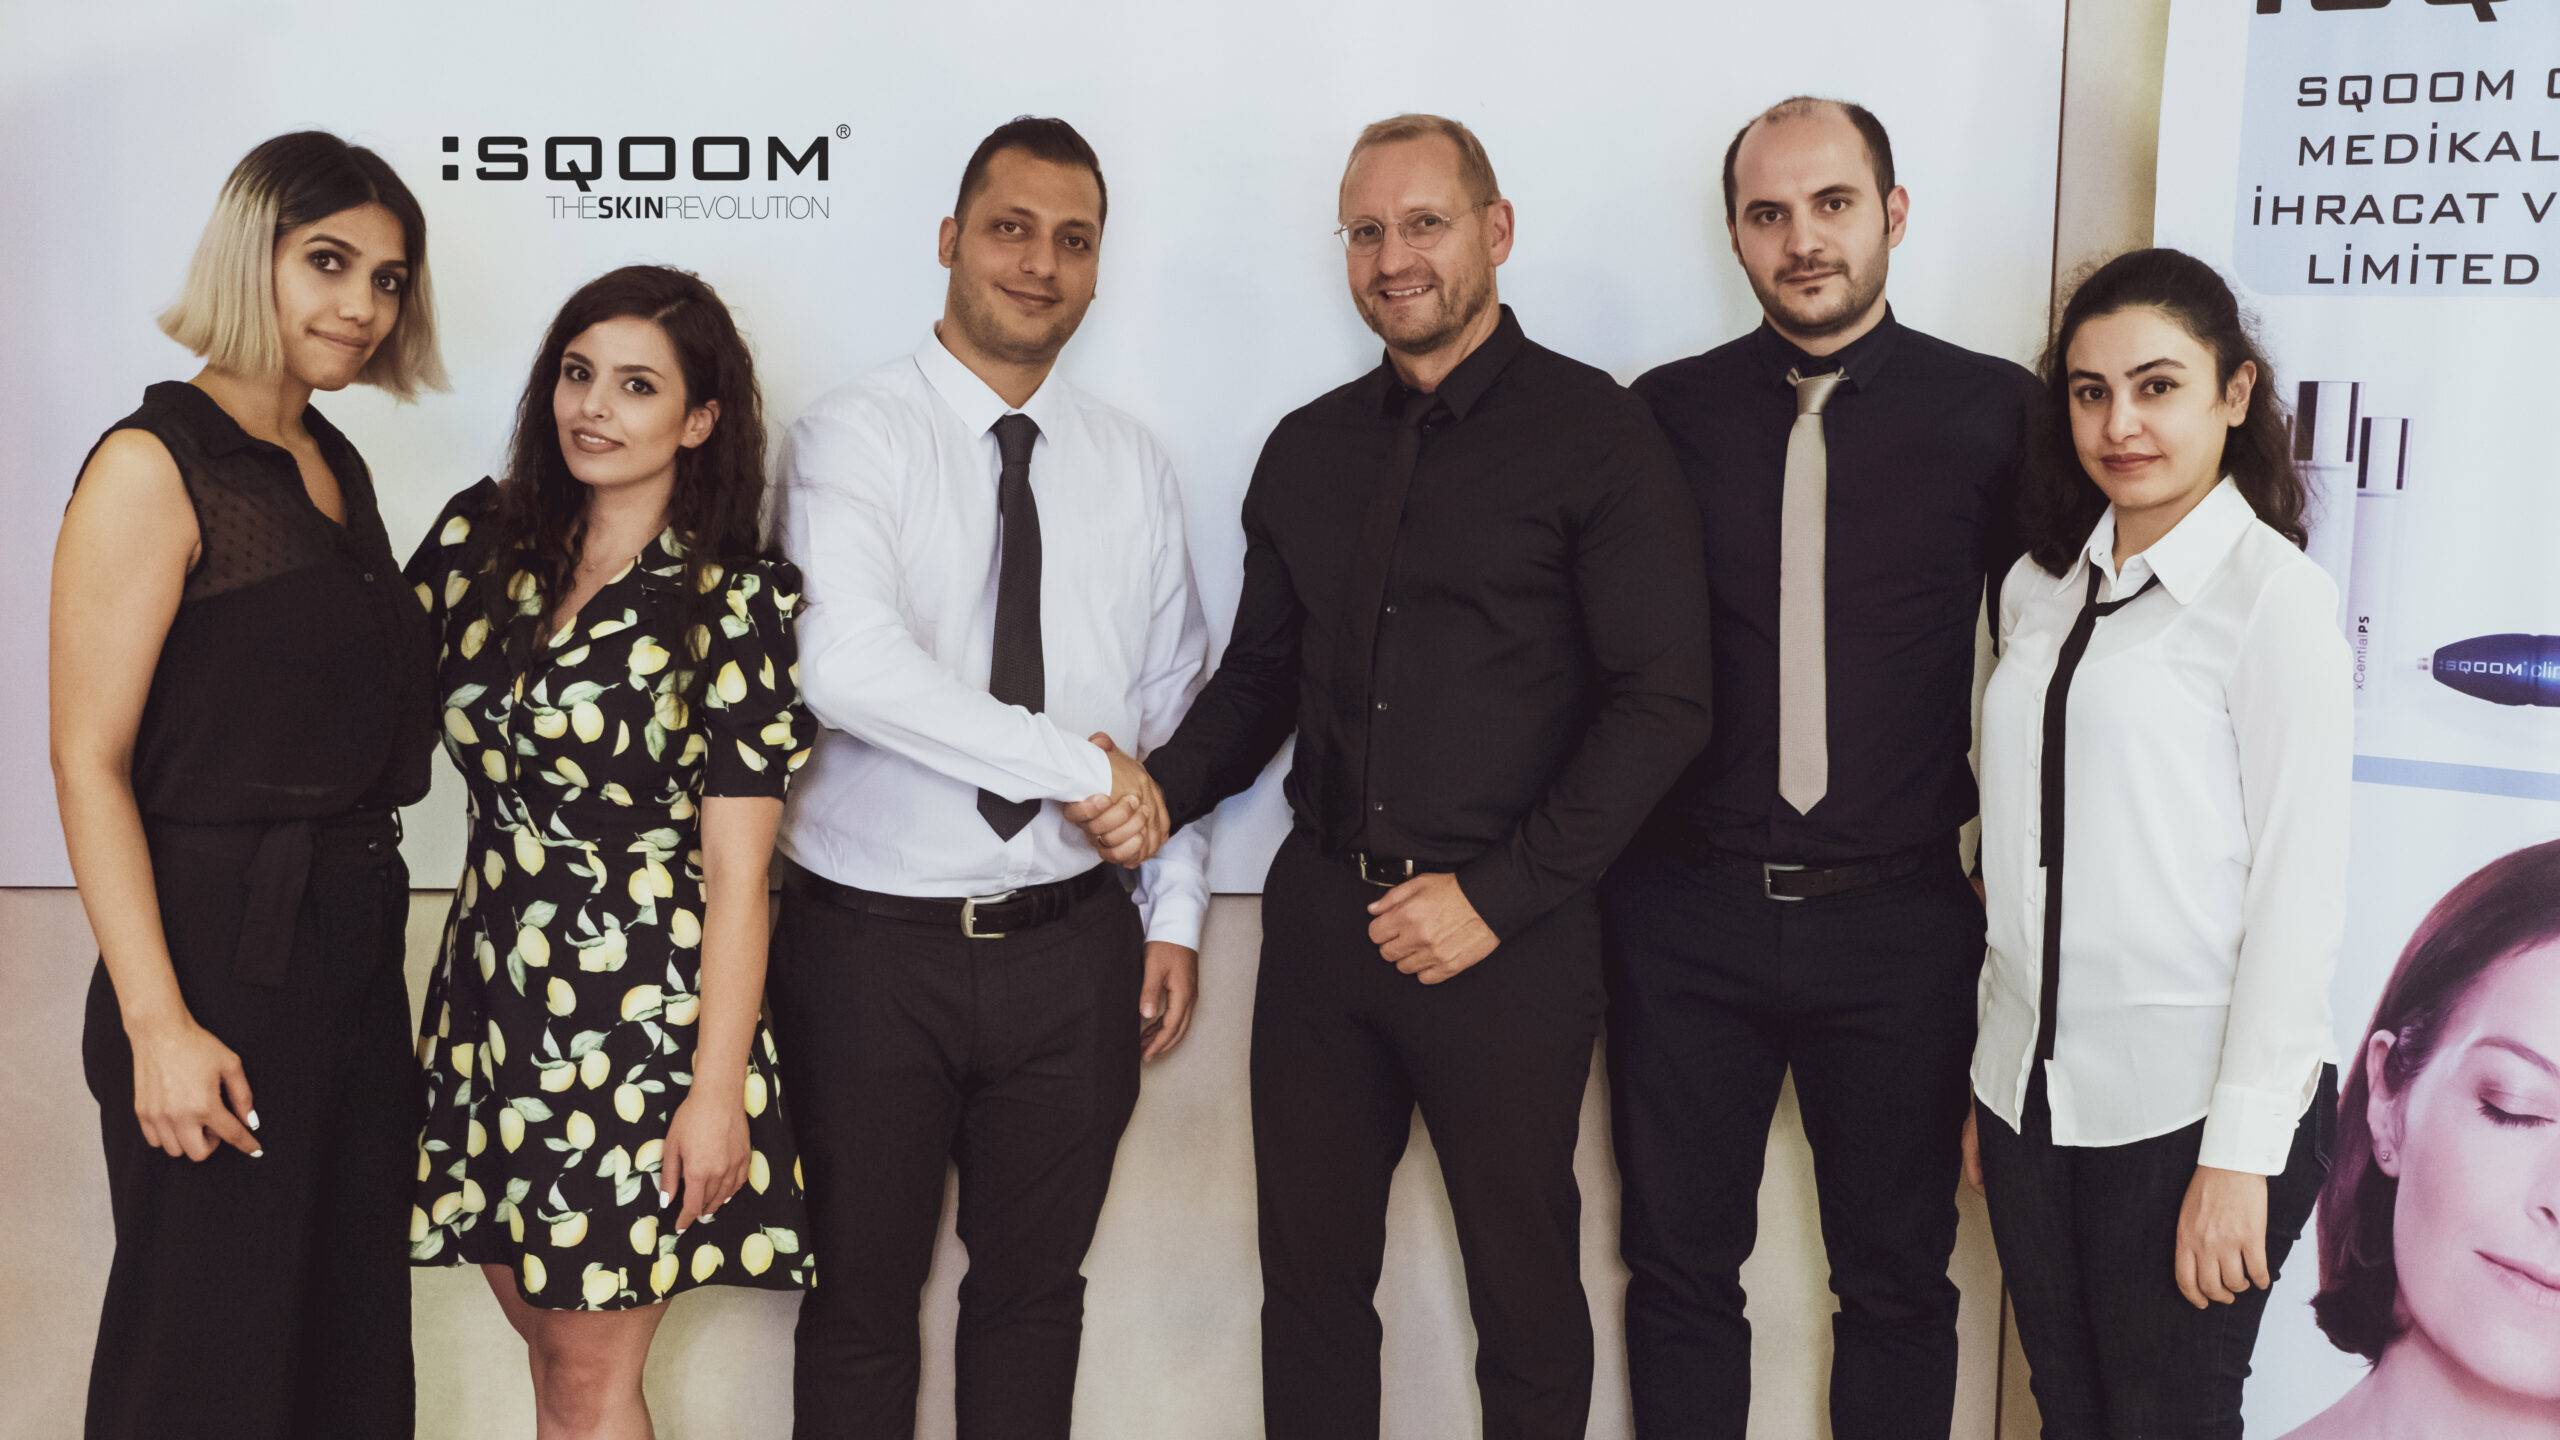 SQOOM Turkey: Our new office